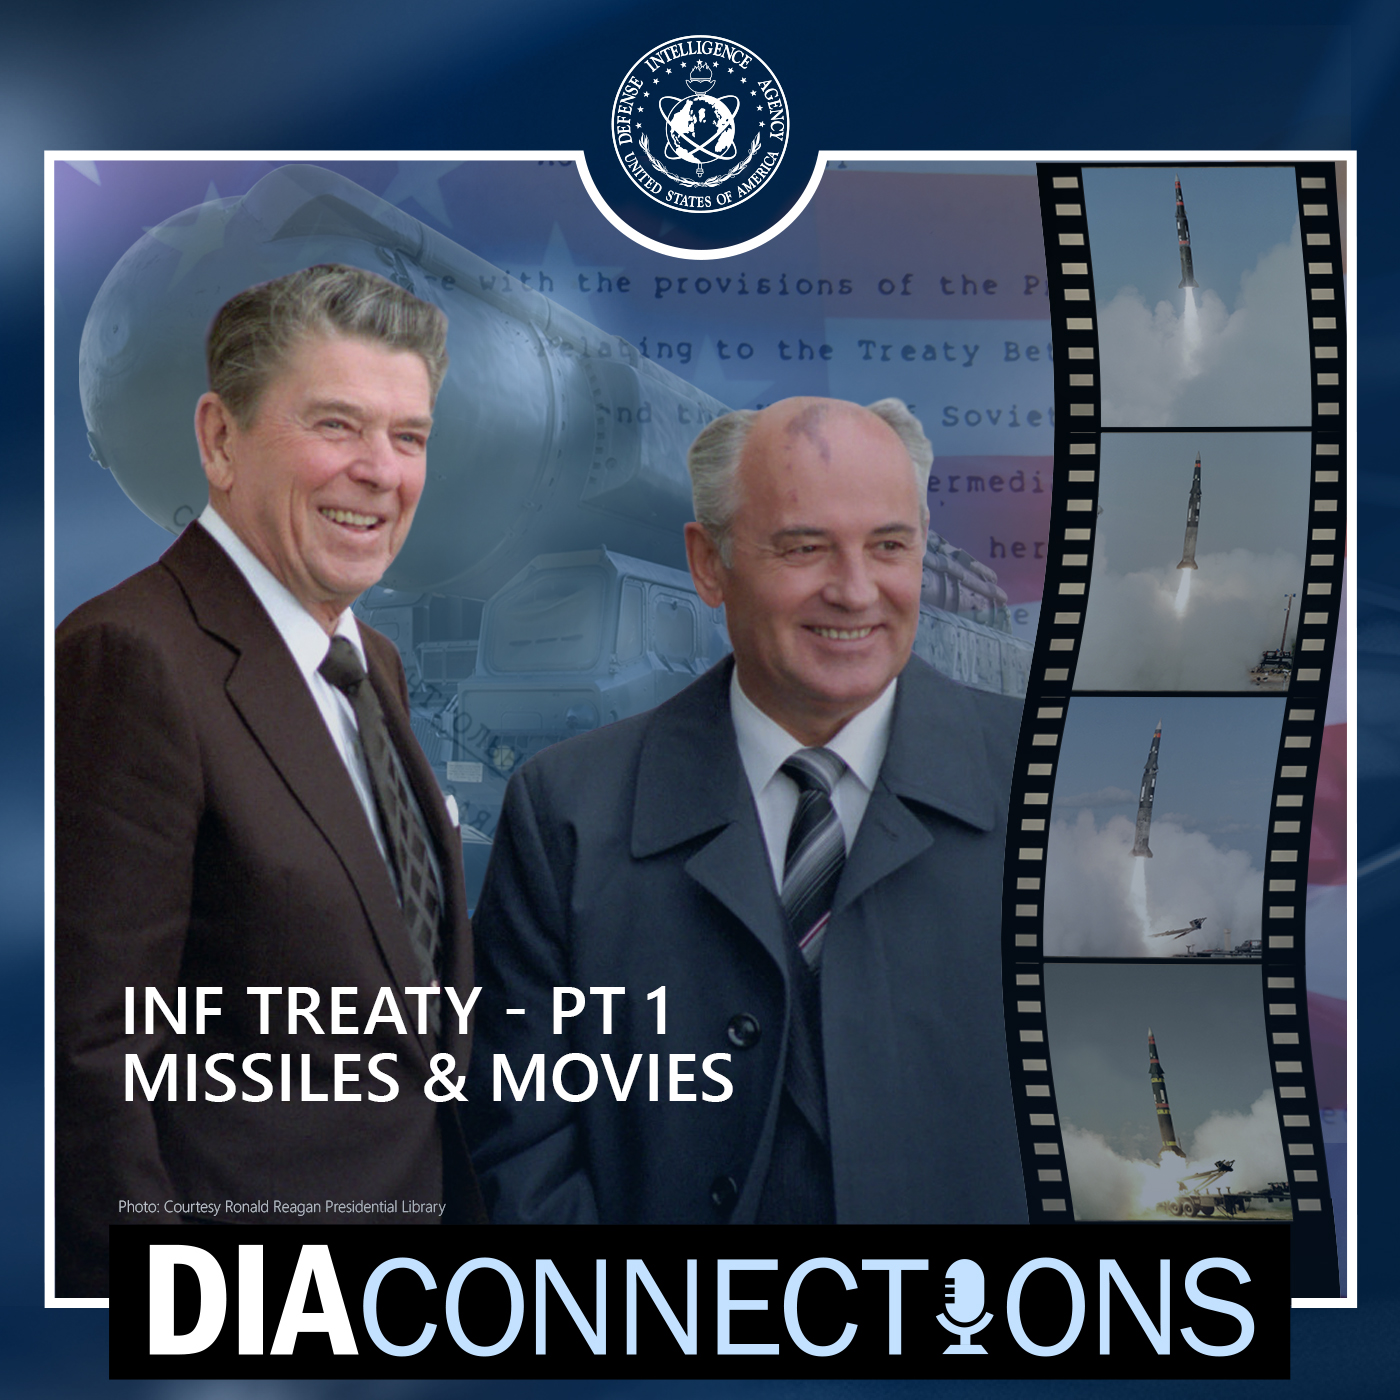 Image portait of Ronald Reagan and Mikhail Gorbachev with film pictures of a missile launching.